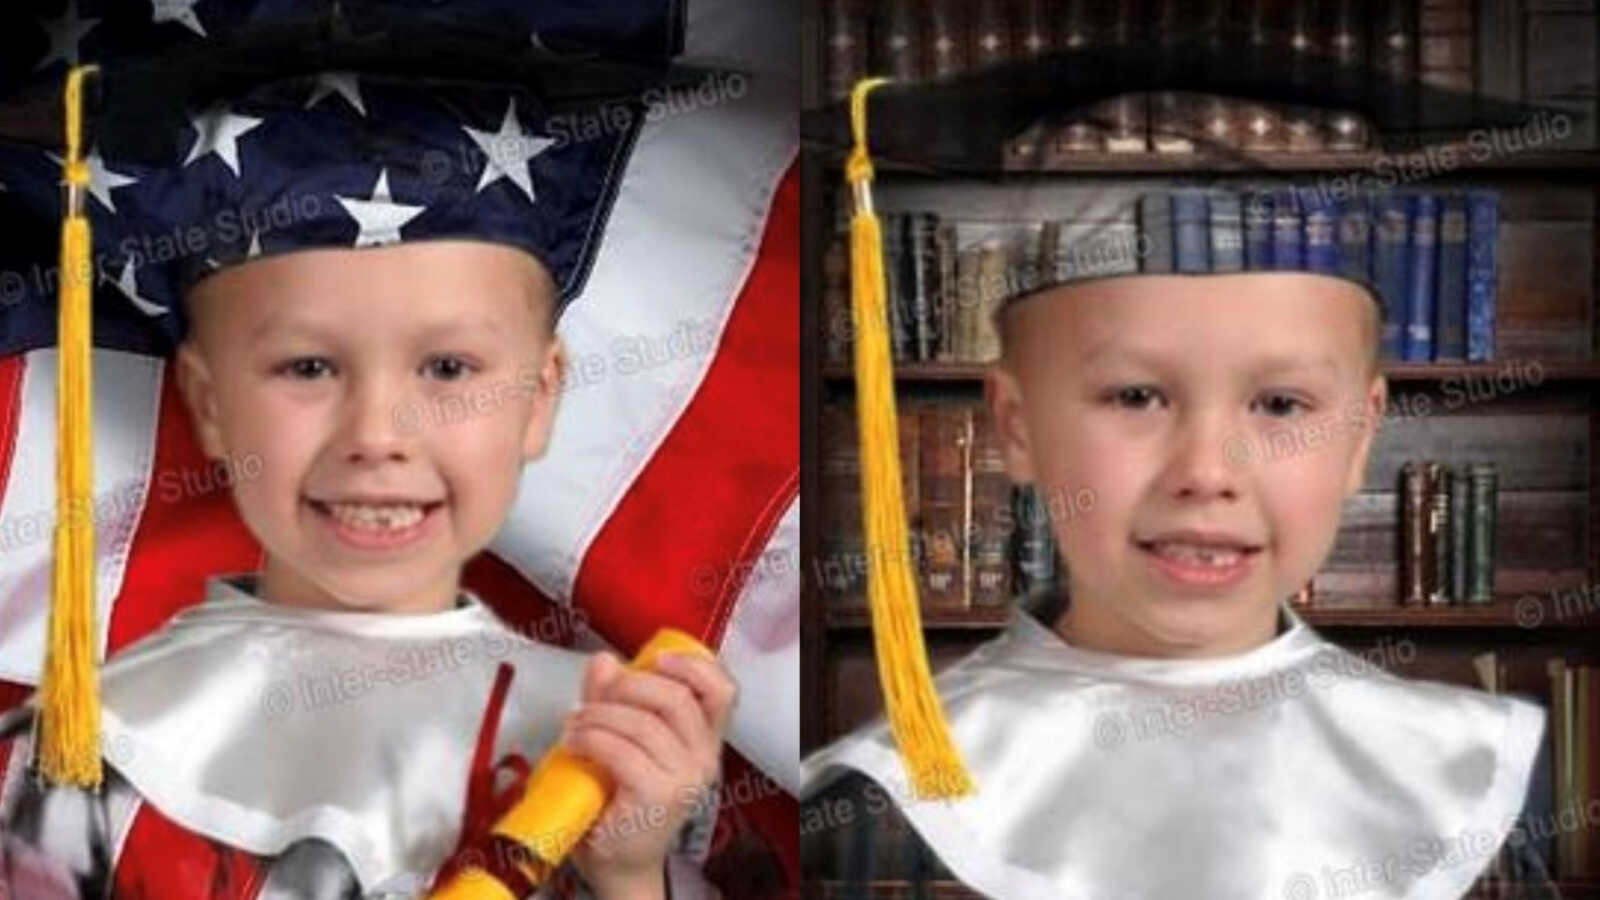 young boy in graduation cap and gown